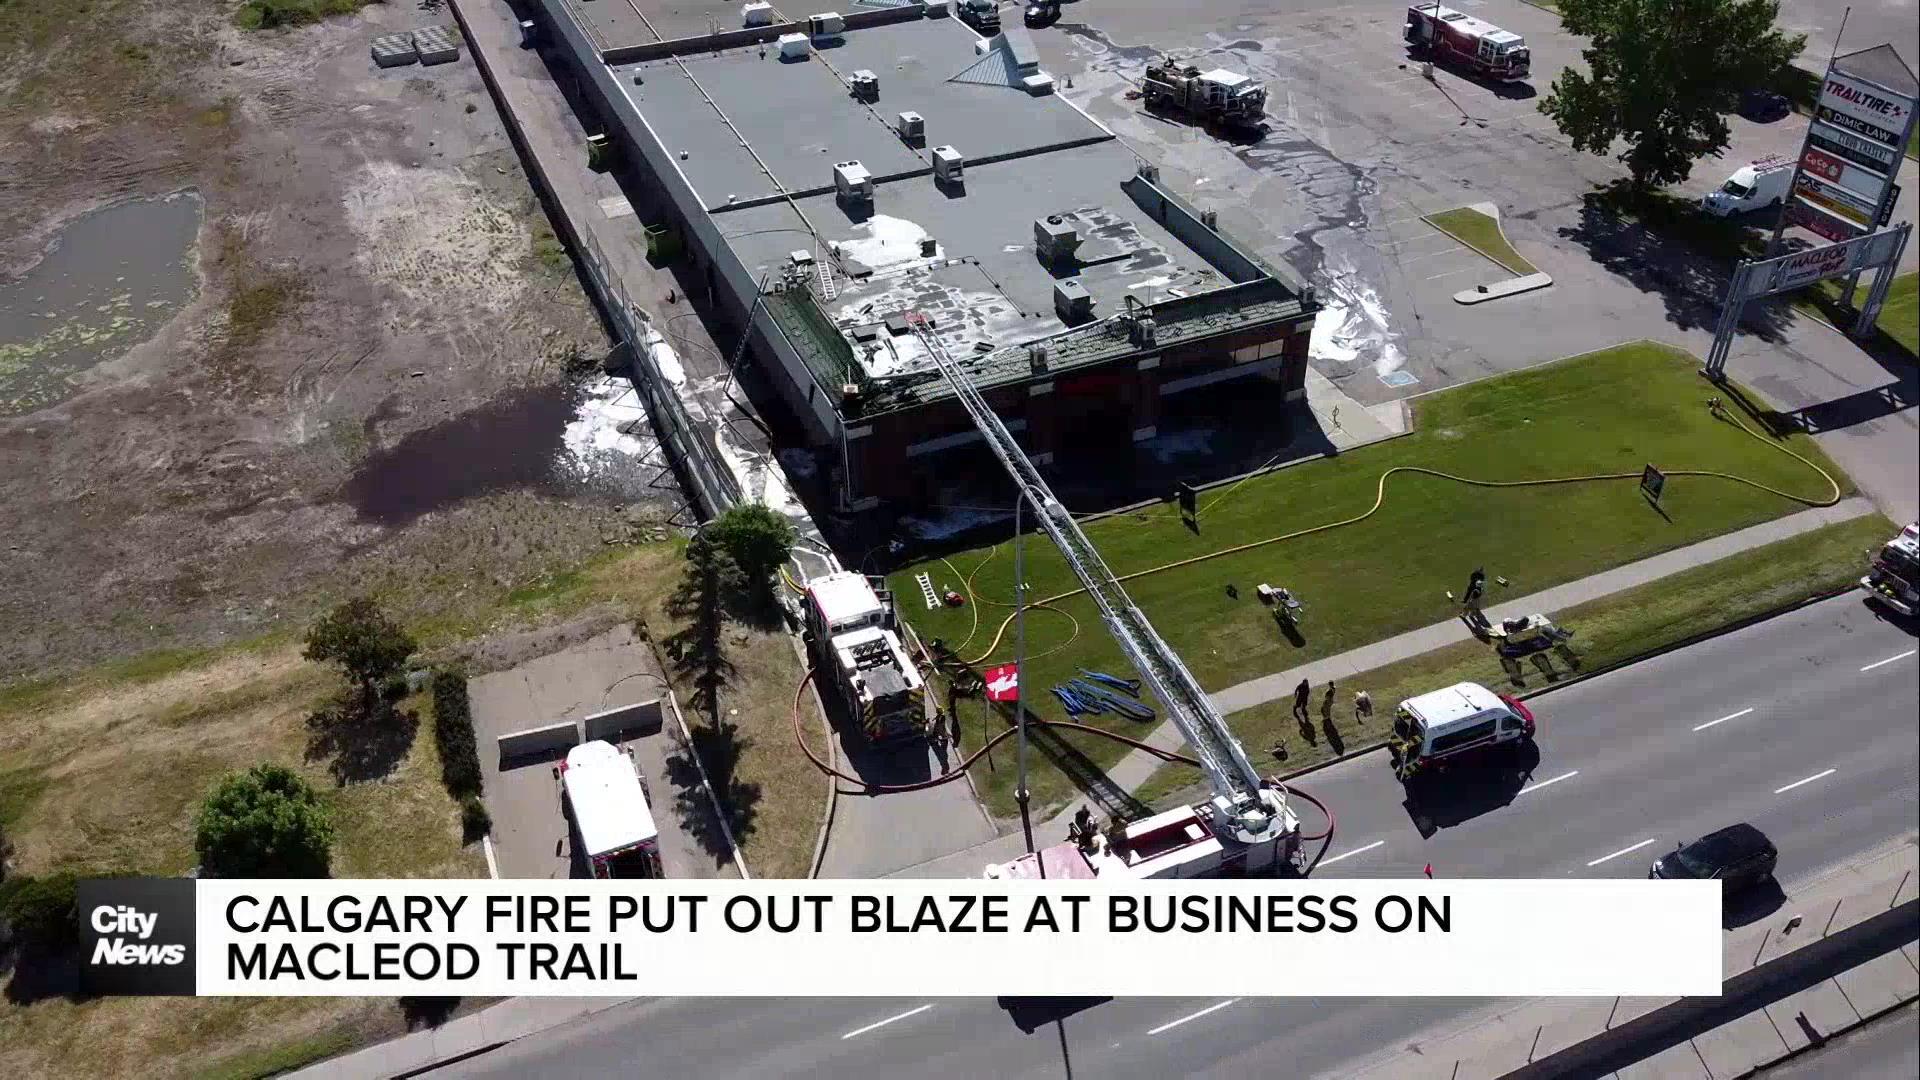 Calgary Fire put out blaze at business on Macleod Trail